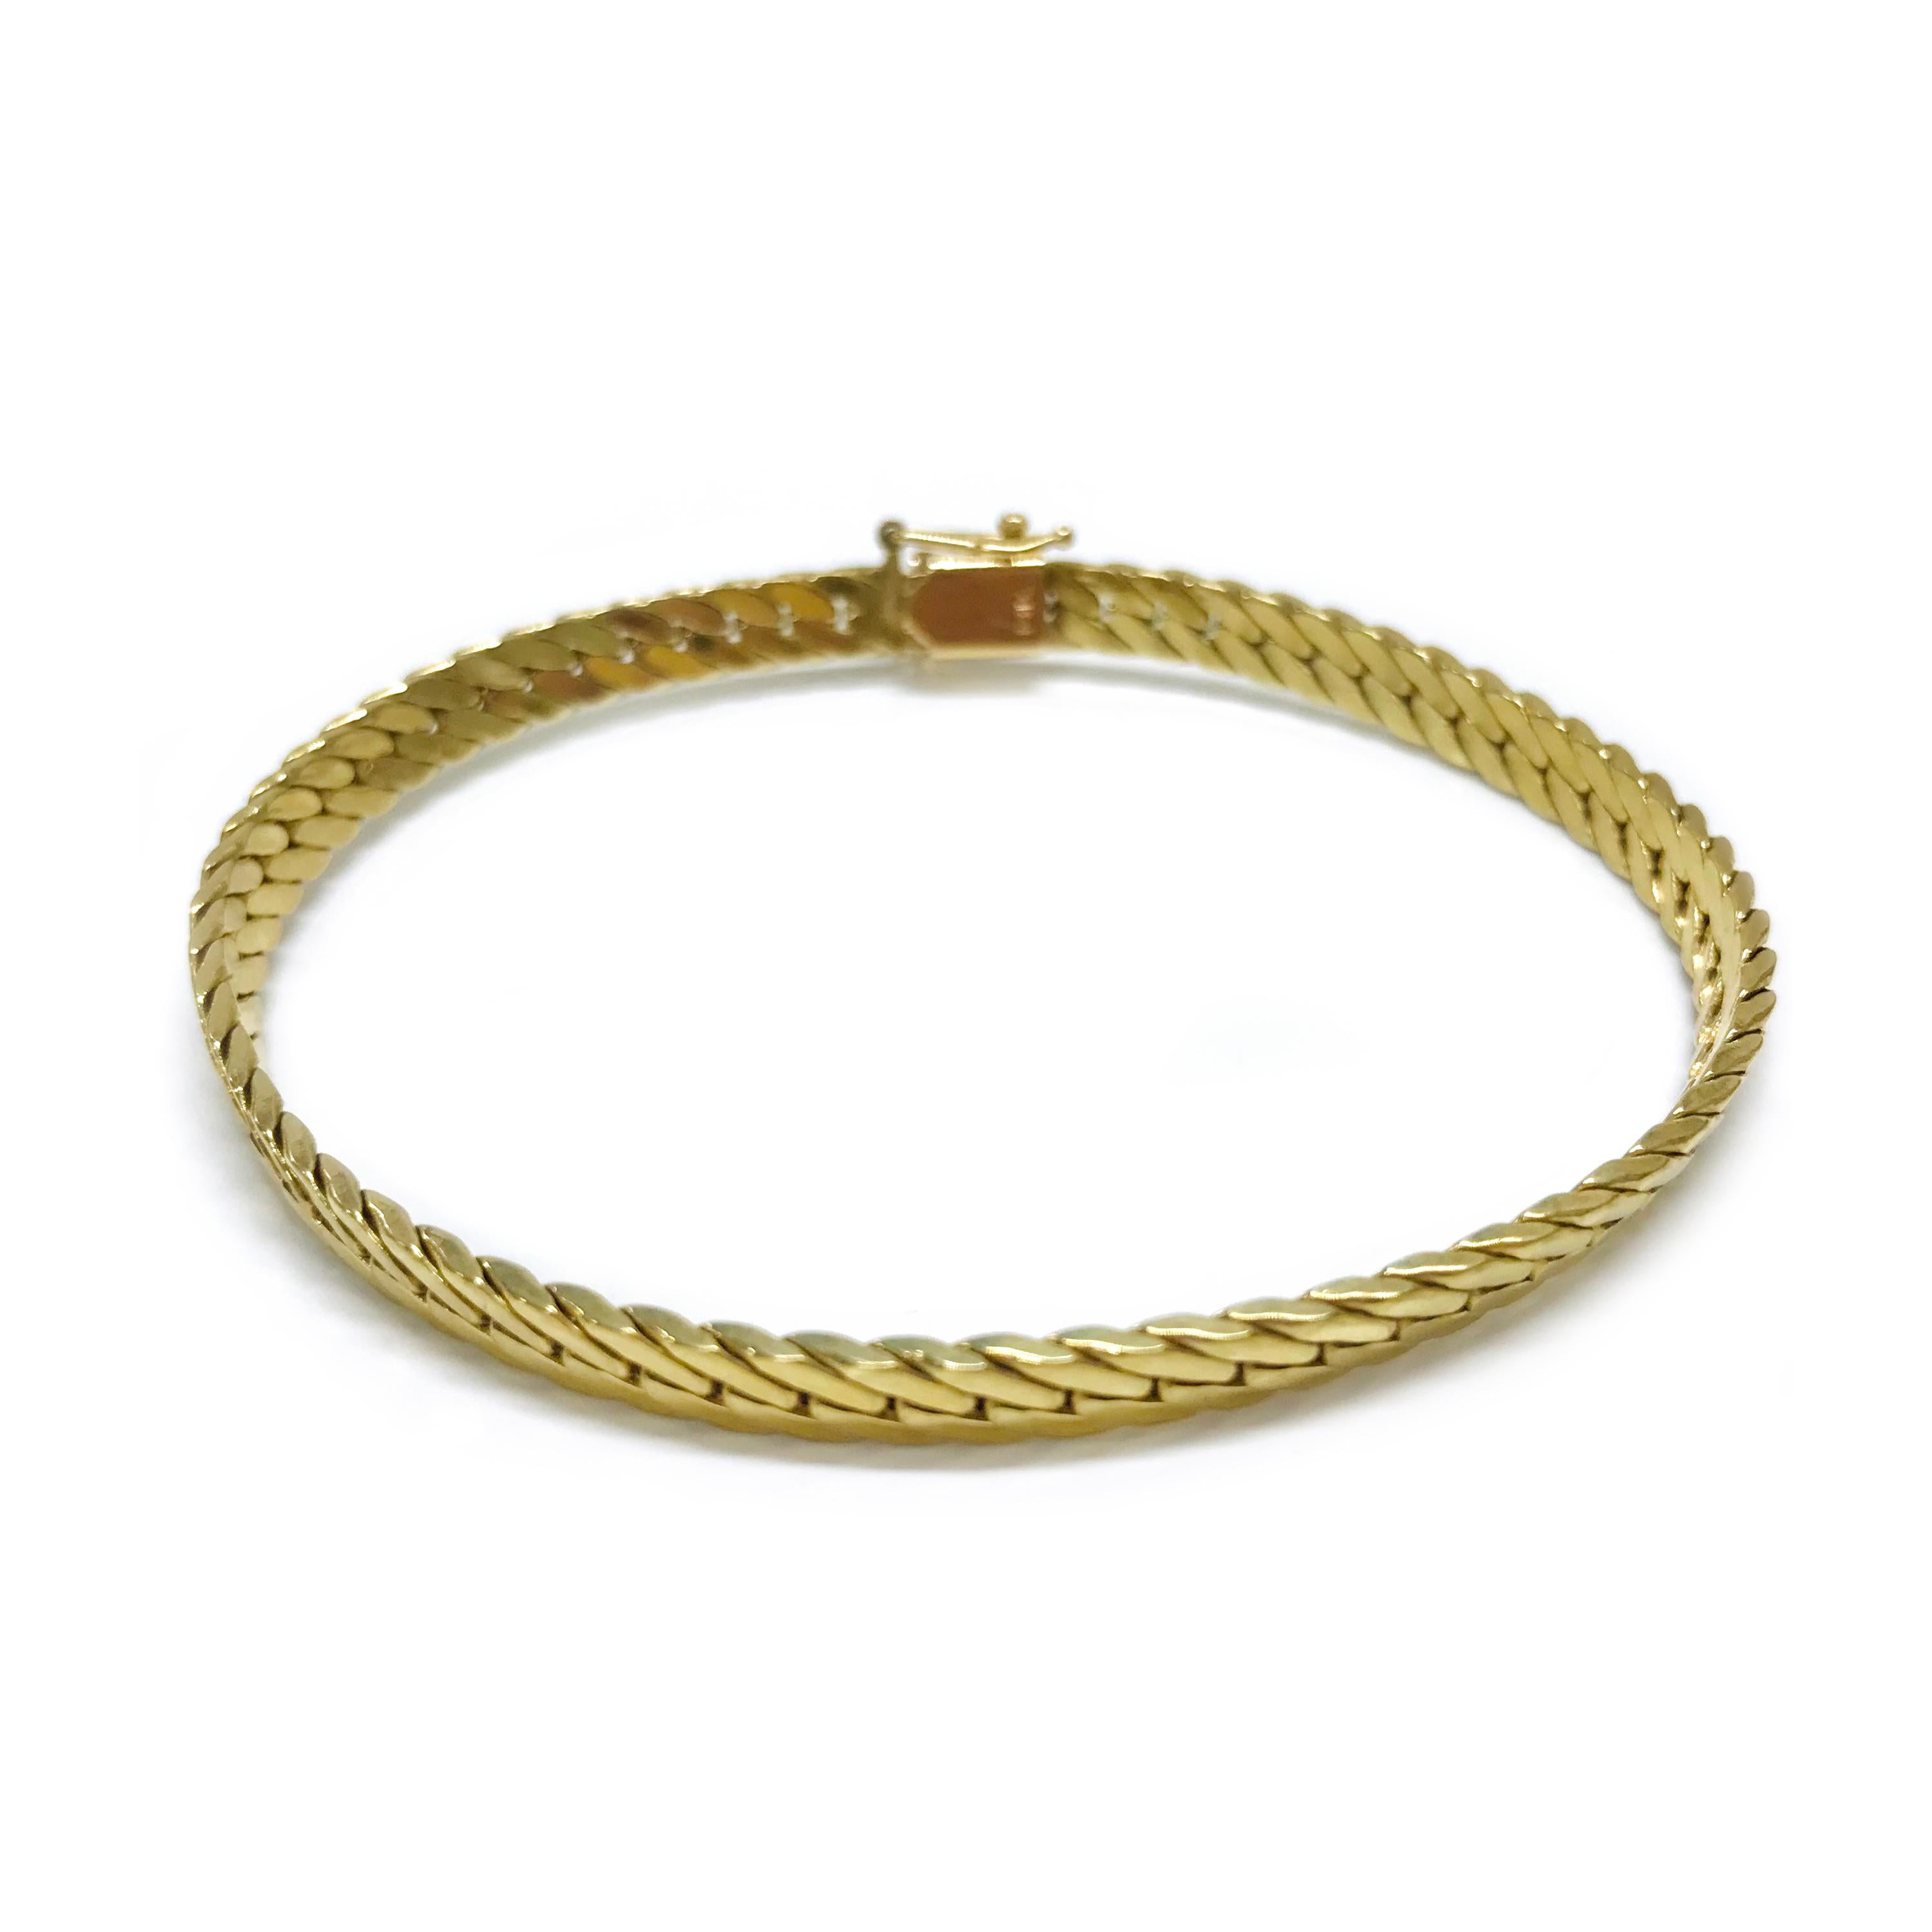 14 Karat Link Bracelet Bangle. This bracelet features beveled herringbone links. The bracelet a flexible when not closed however when the bracelet is closed it stiffens (see photos) and is not flexible. The bracelet is 5mm wide and 7 1/2